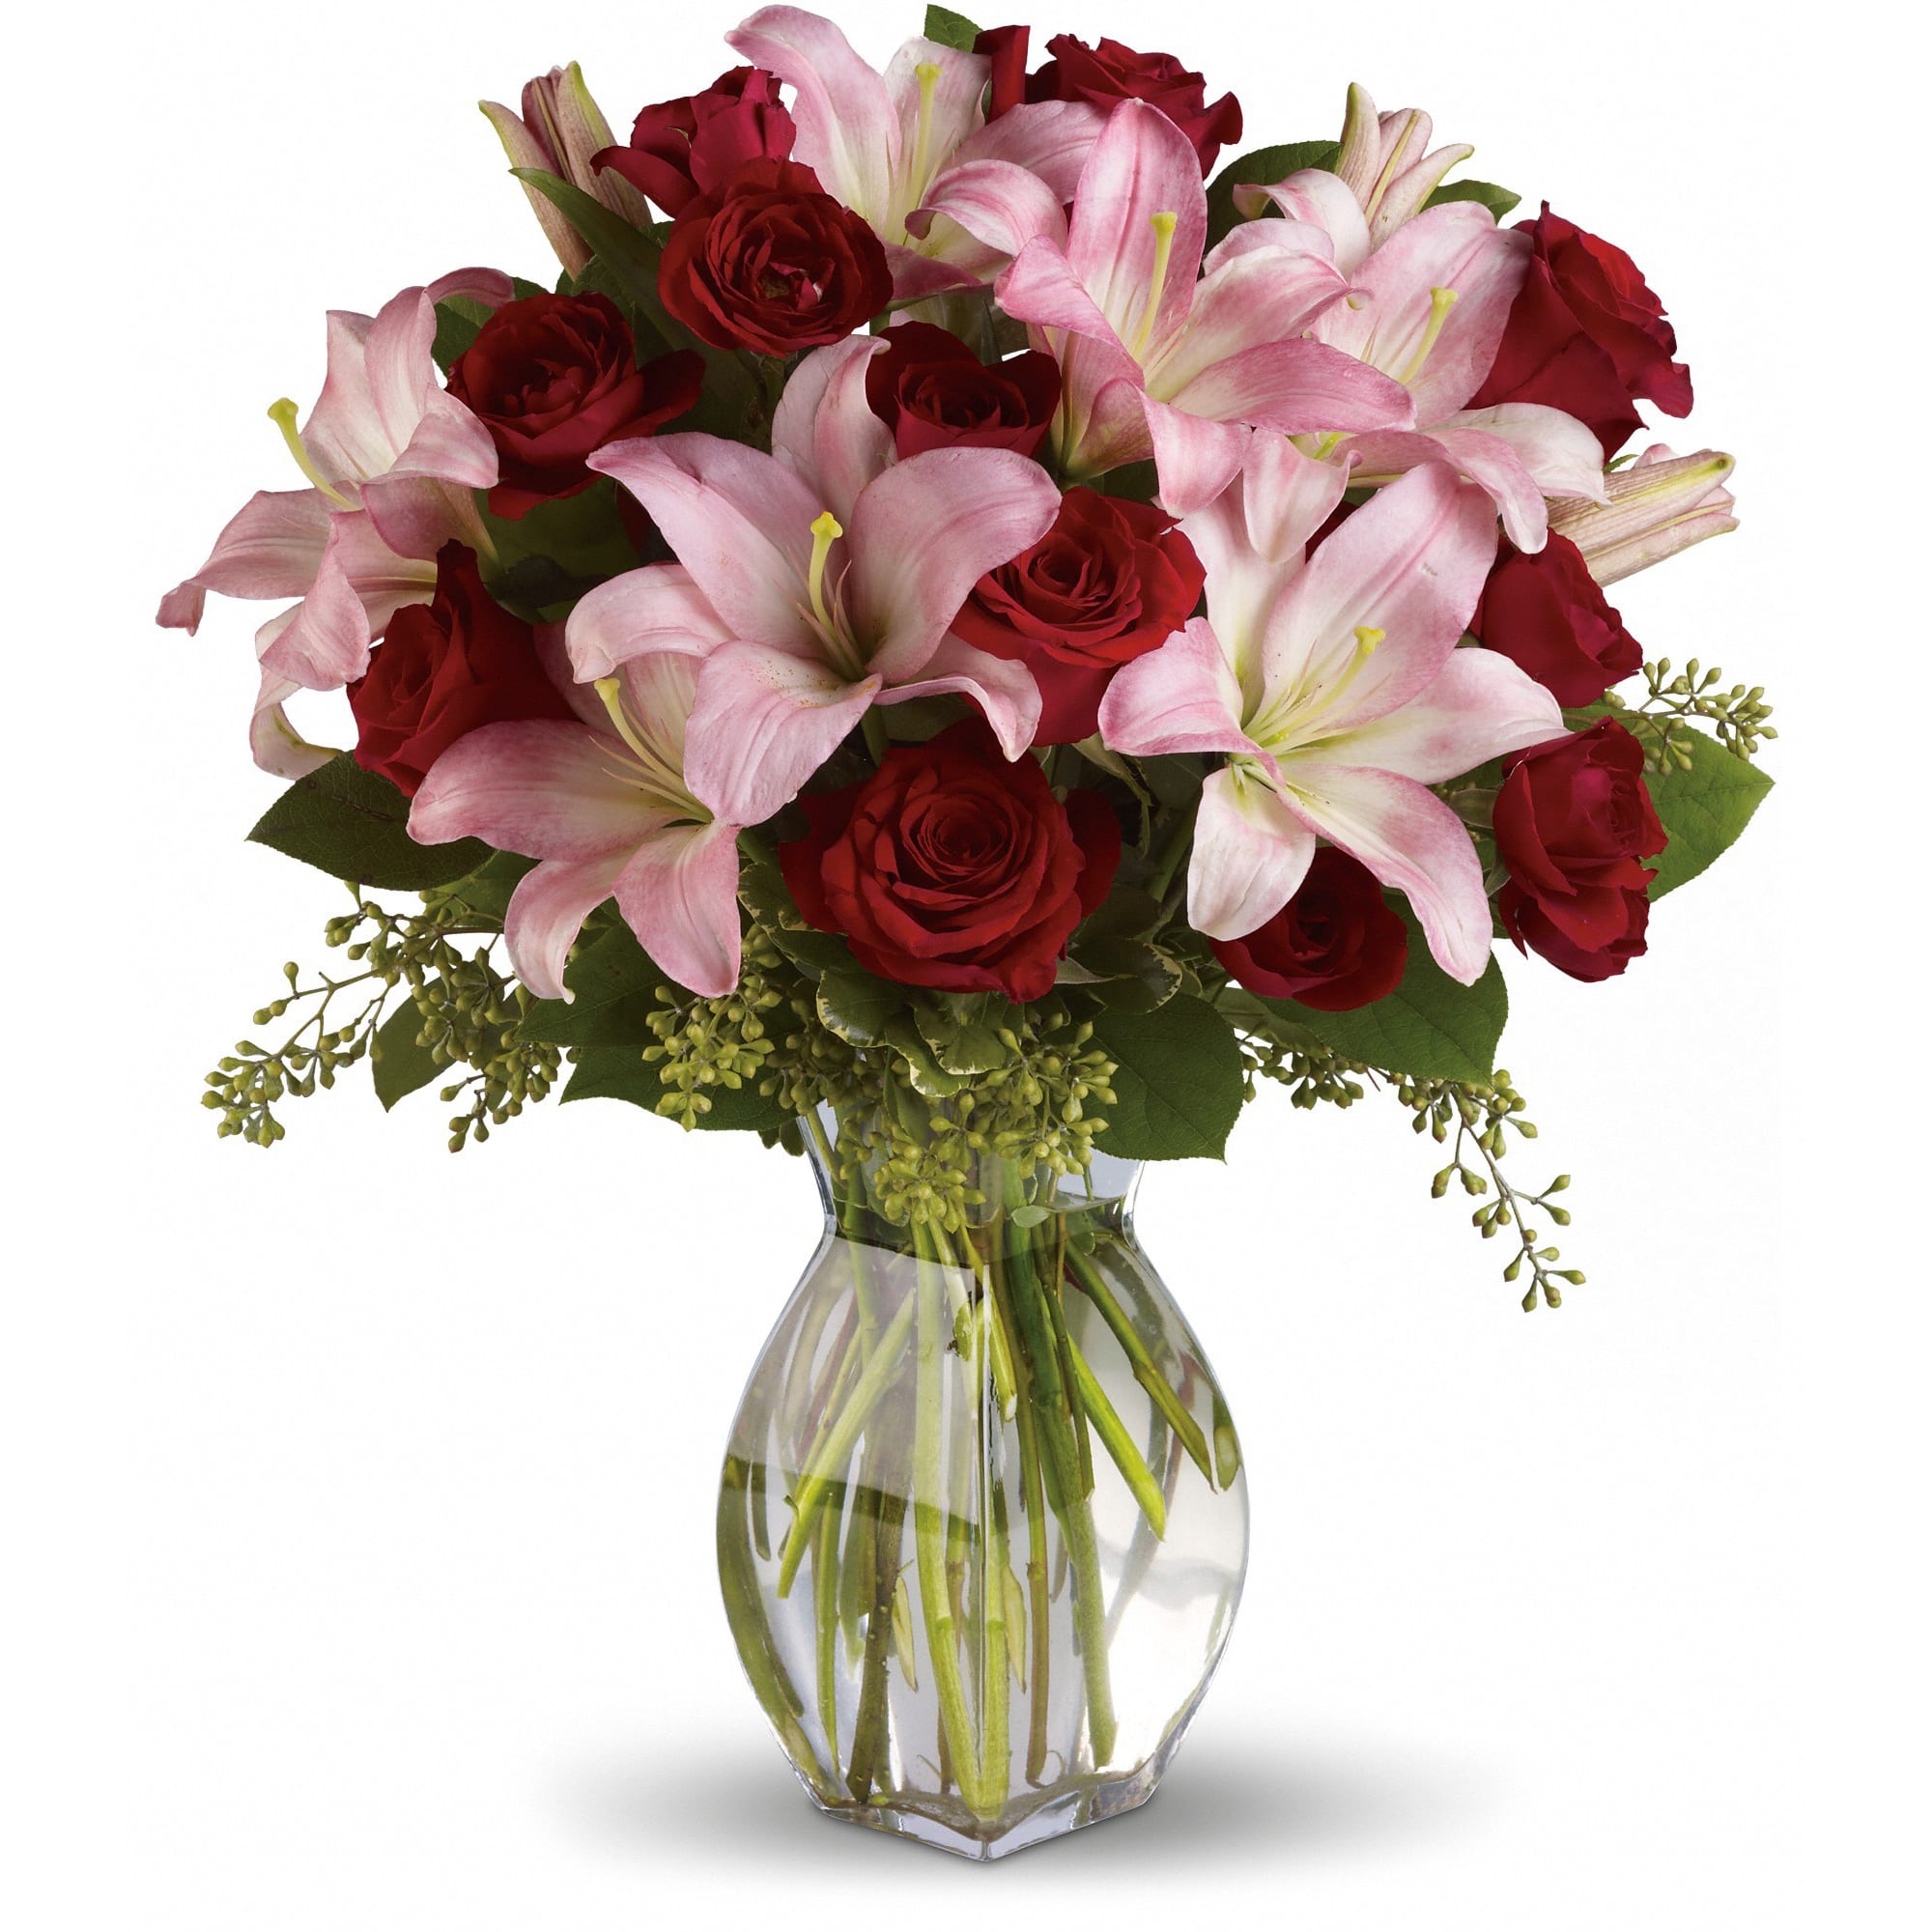 Lavish Love Bouquet with Long Stemmed Red Roses  - Lovely reds and pinks come together in this lavishly romantic anniversary gift. Sweetly sentimental, this combination of colors and flowers is a delightfully fresh way to say &quot;I love you.&quot;    Radiant red roses and spray roses along with pretty in pink asiatic lilies are beautifully arranged in a stylish glass vase. It's a beautiful way to celebrate a romance that deepens with each passing year.    Approximately 17&quot; W x 20&quot; H    Orientation: One-Sided        As Shown : T5-1A      Deluxe : T5-1B      Premium : T5-1C    